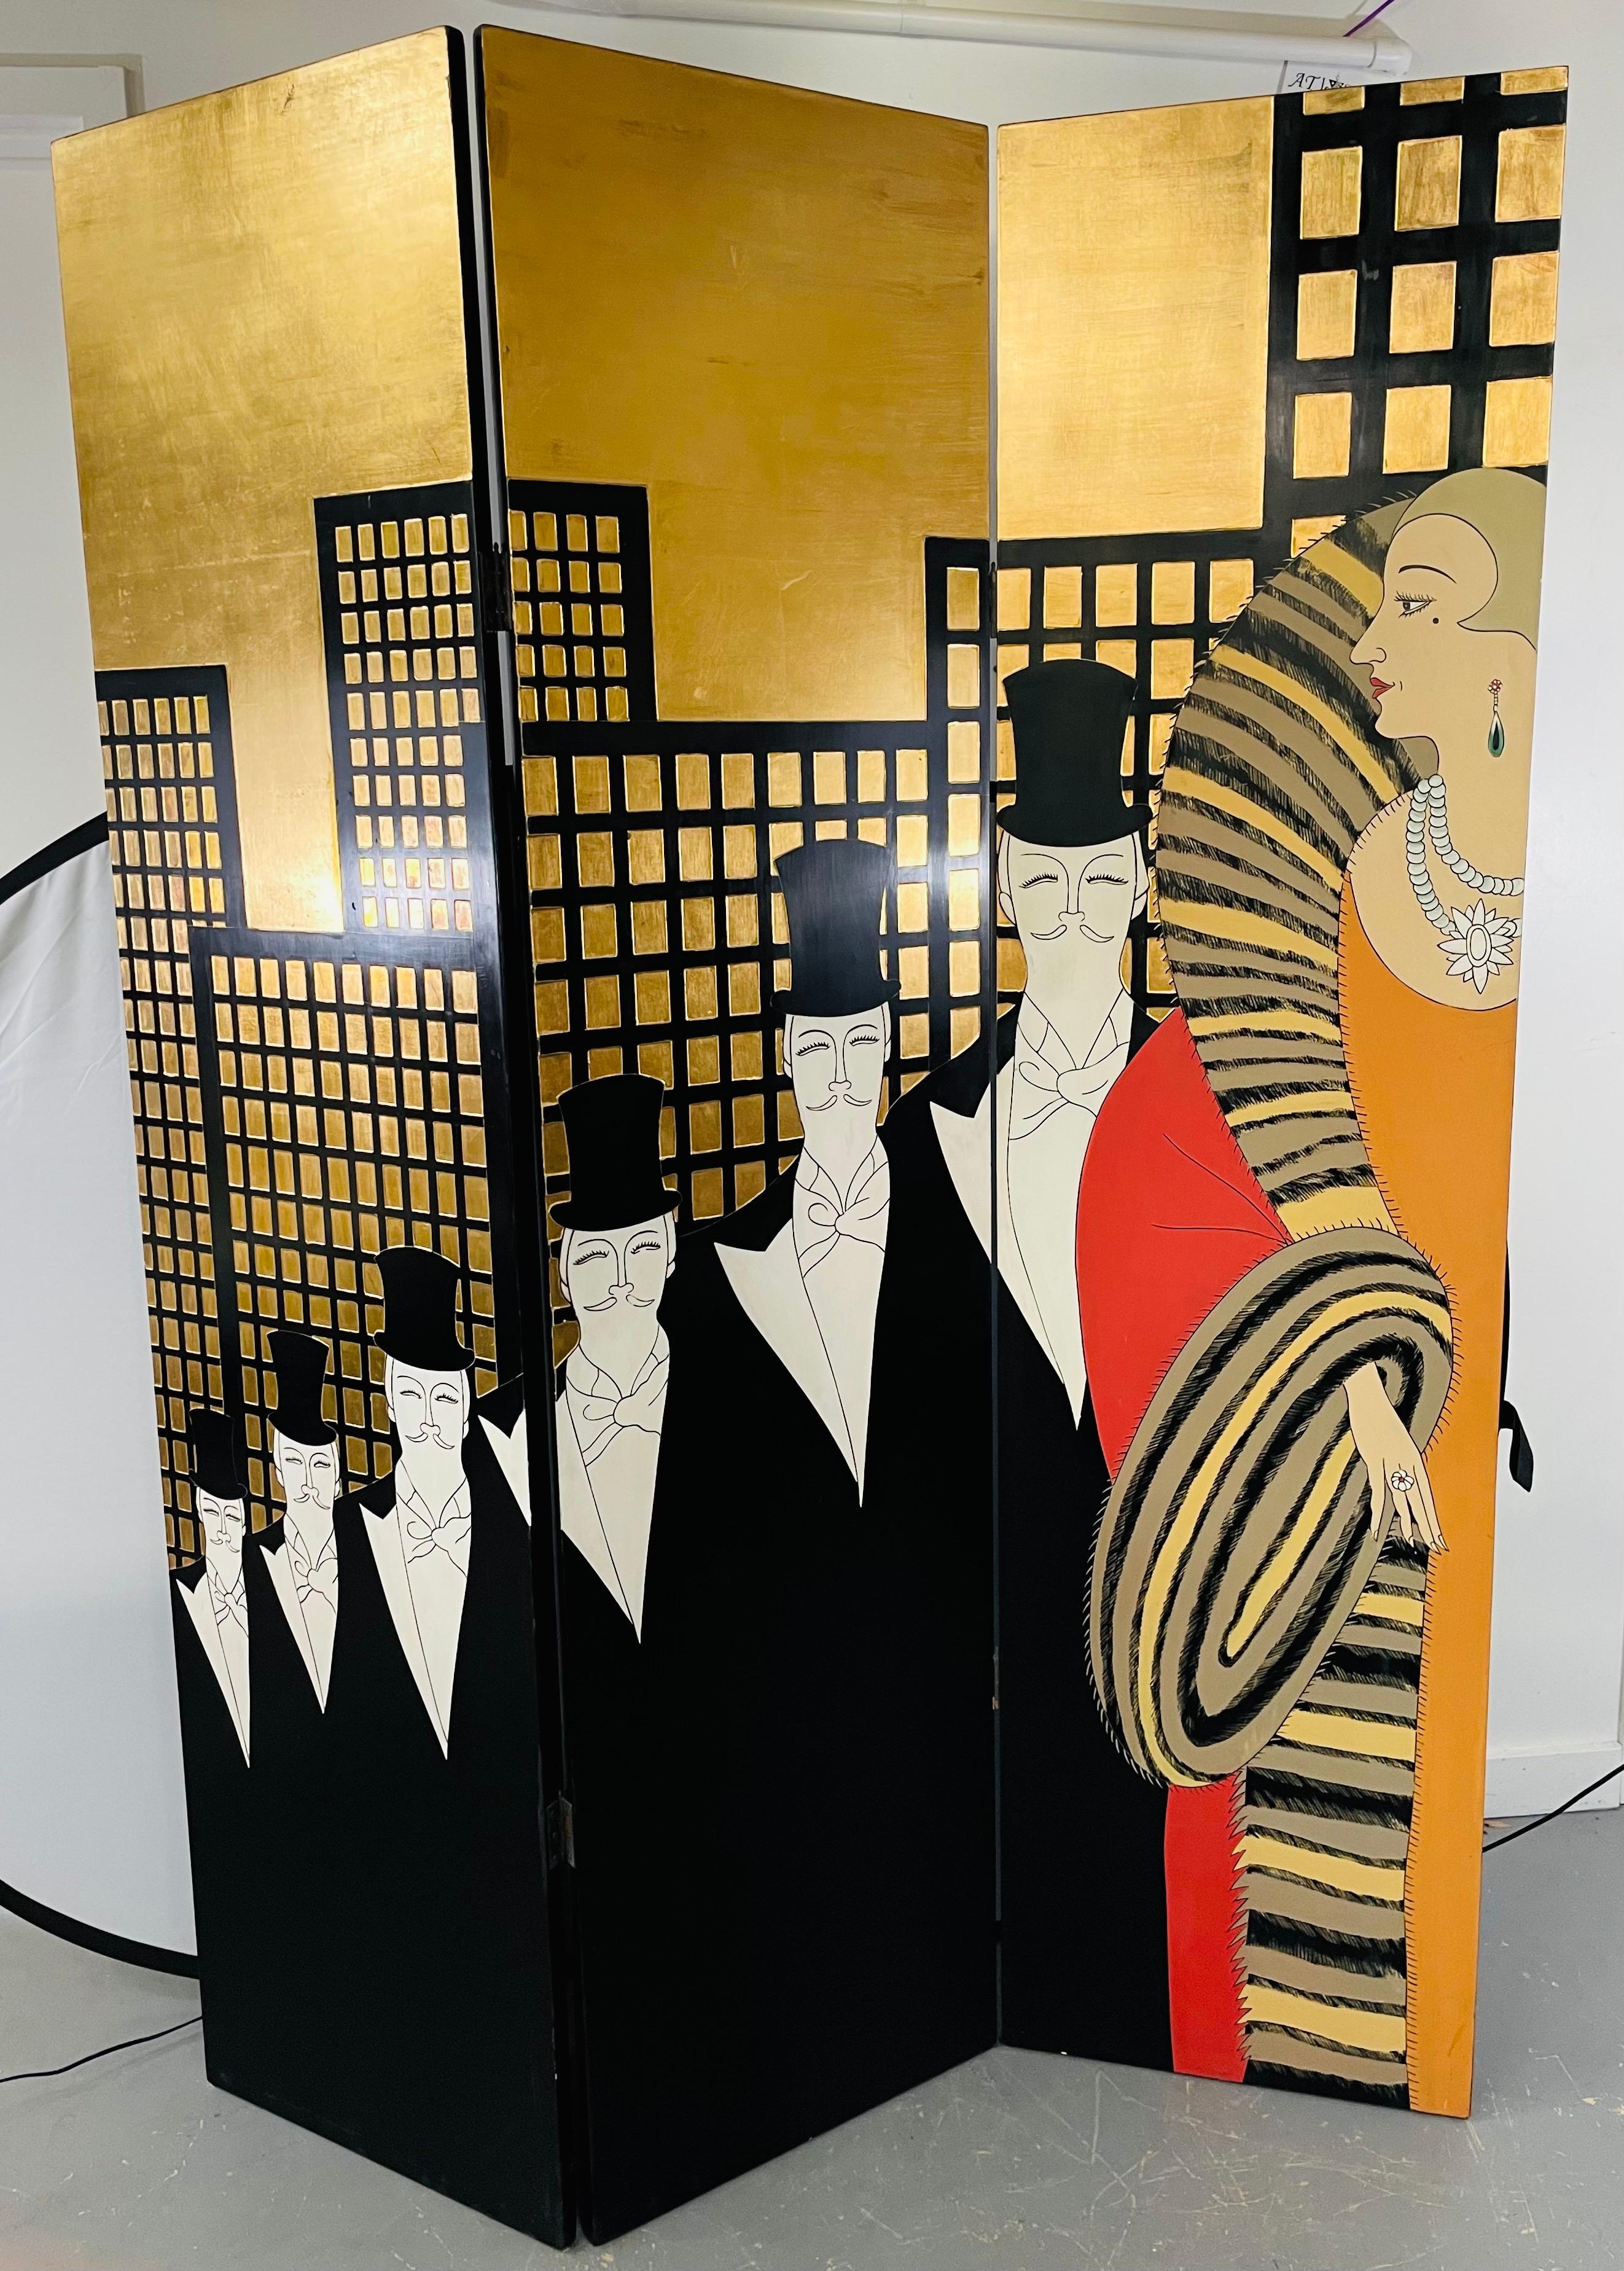 A rare Art Deco Erte (Romain de Tirtoff (Erte, Russian/French, 1892-1990) three panel room divider or screen featuring a glamorous design of 6 men and 
and one polychrome painted woman wearing a fur and pearls, dressed up in 1930's costumes with